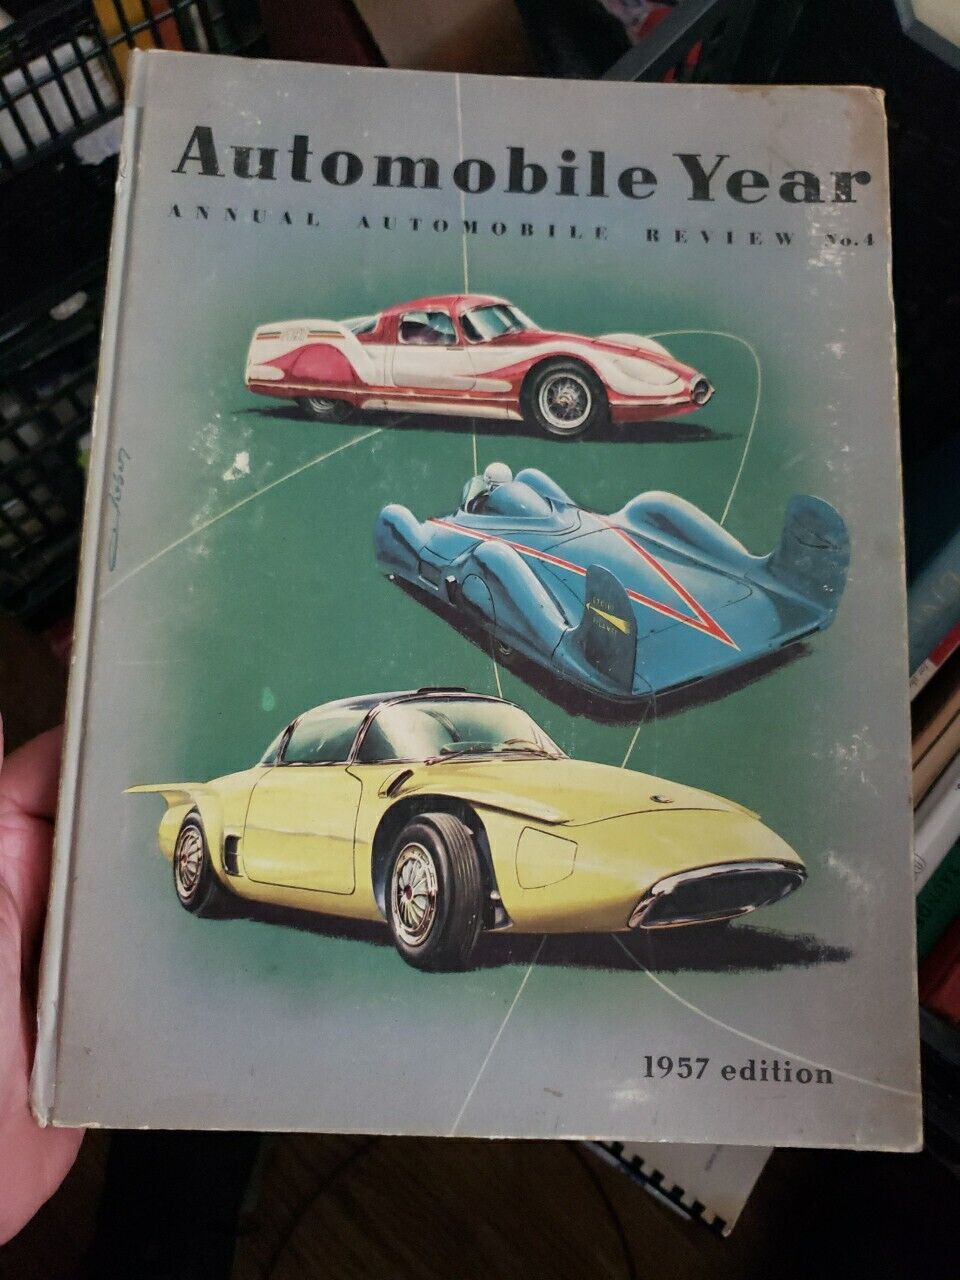 Automobile Year Annual Automobile Review No. 4. 1957